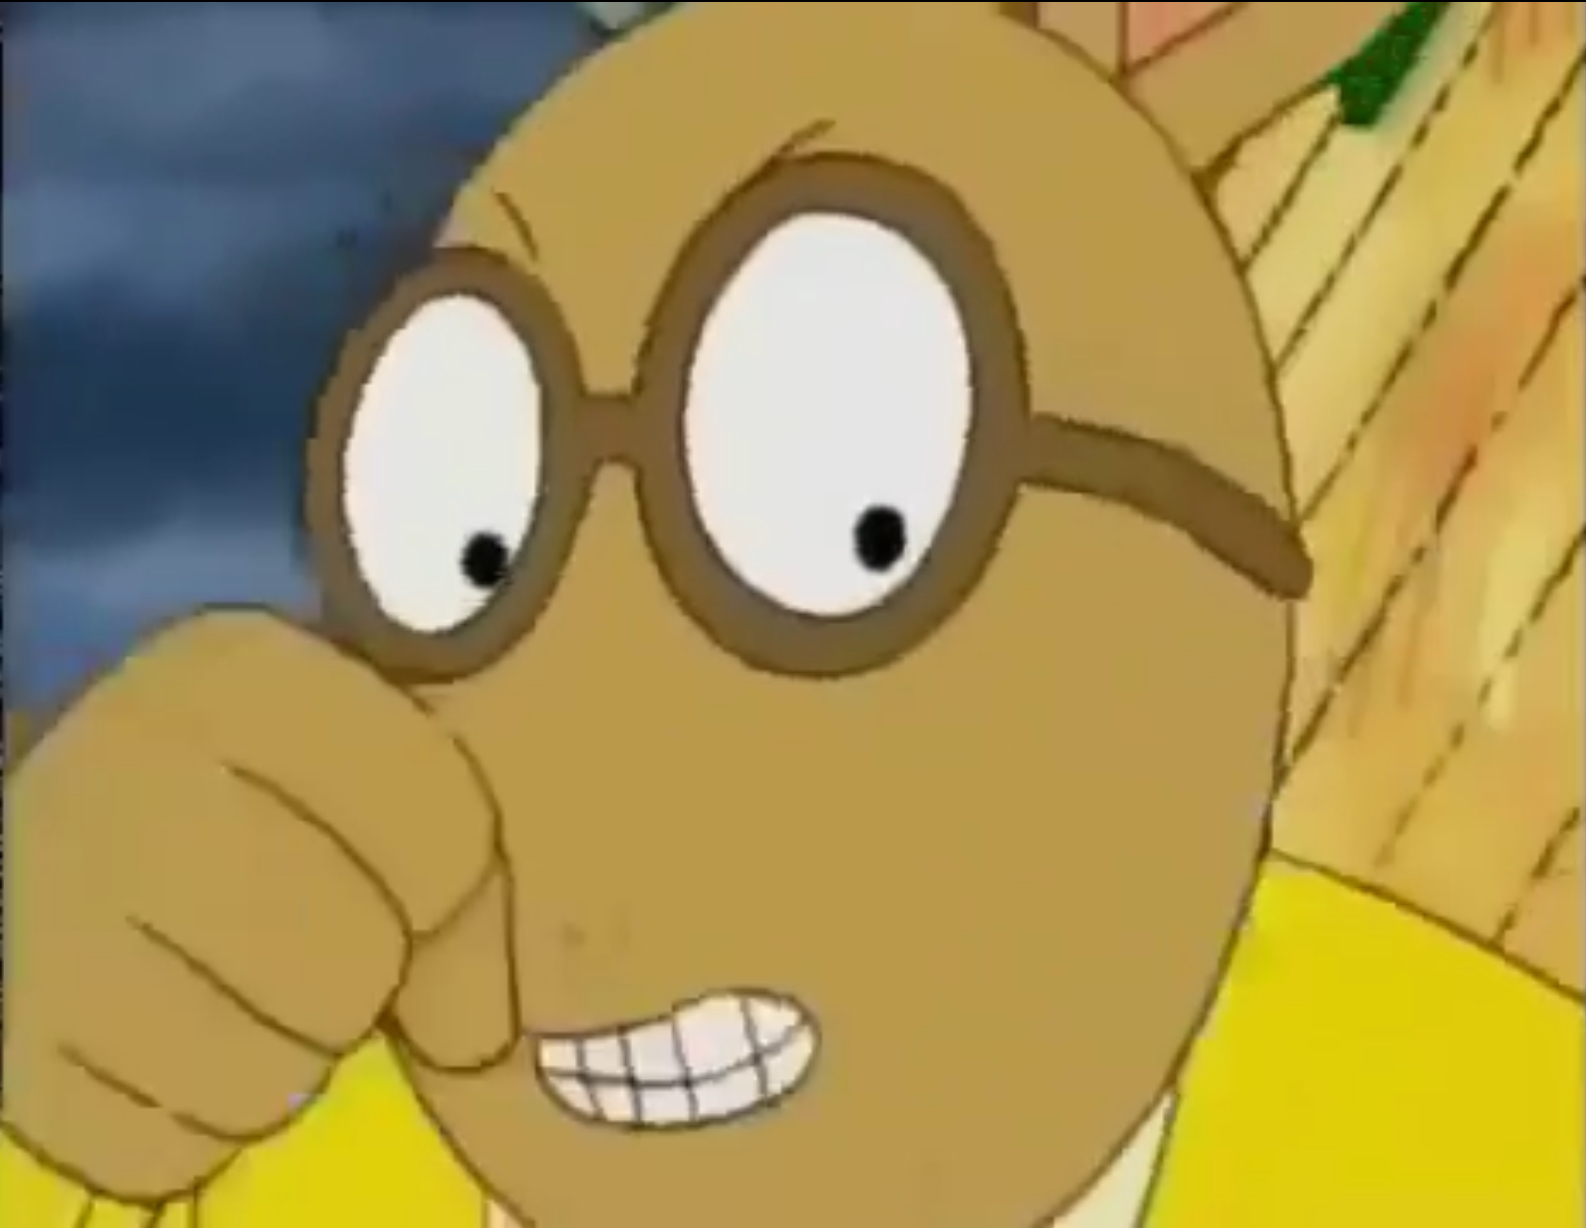 Arthur about to punch Blank Meme Template